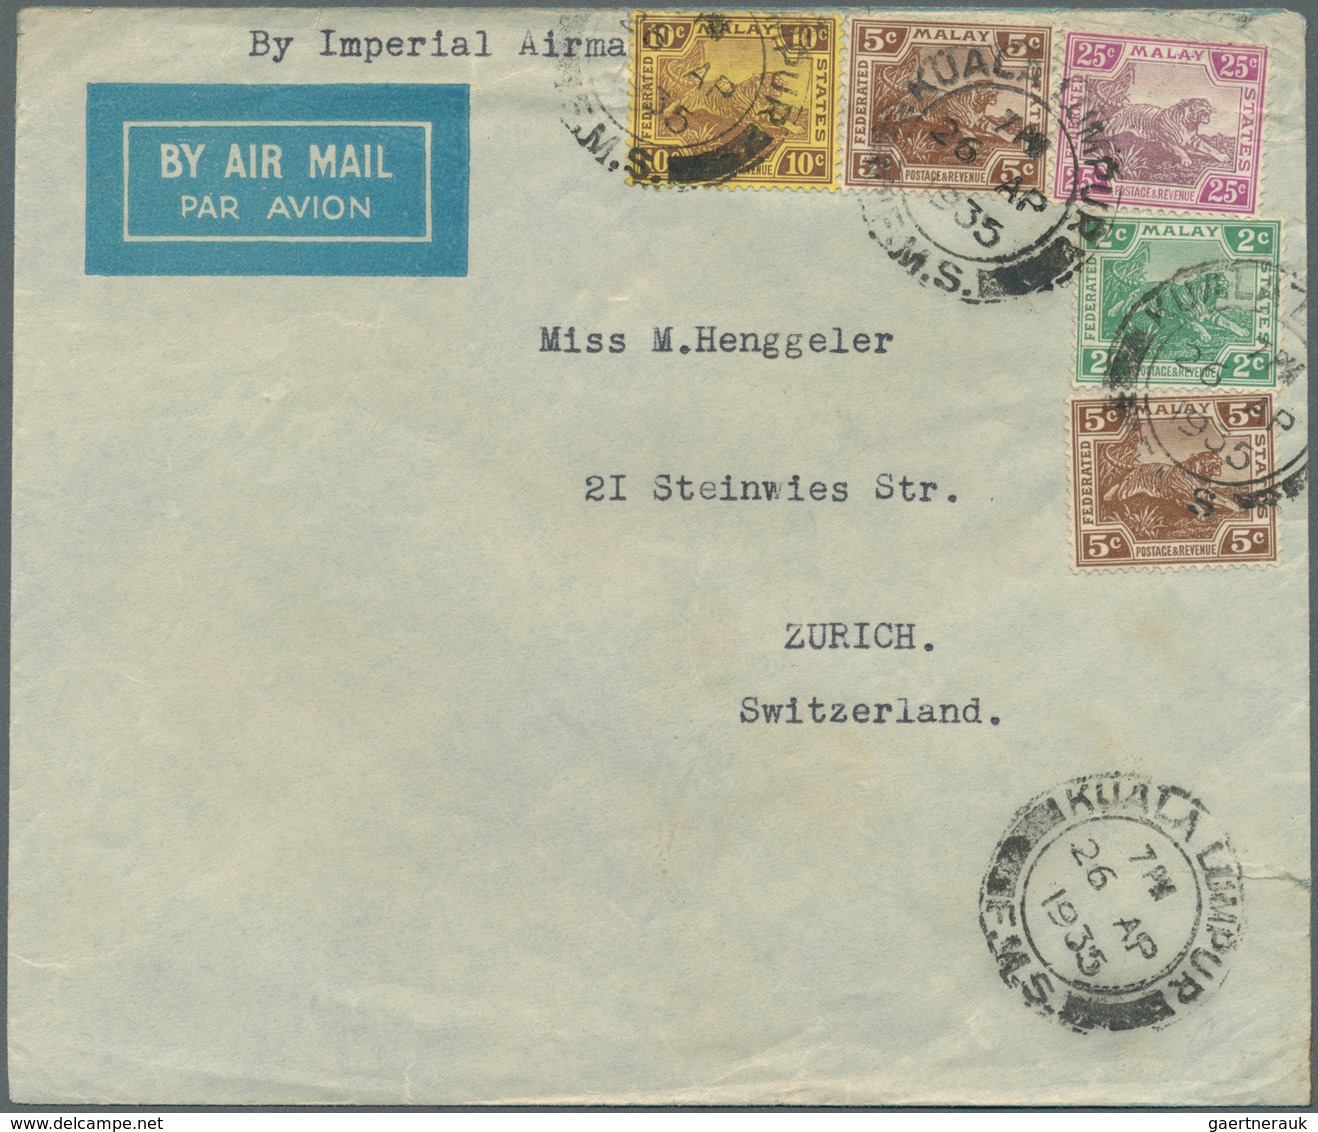 05605 Malaiischer Staatenbund: 1935 (26.4.), Airmail Cover Headed 'By Imperial Airmail' With Five Tiger St - Federated Malay States